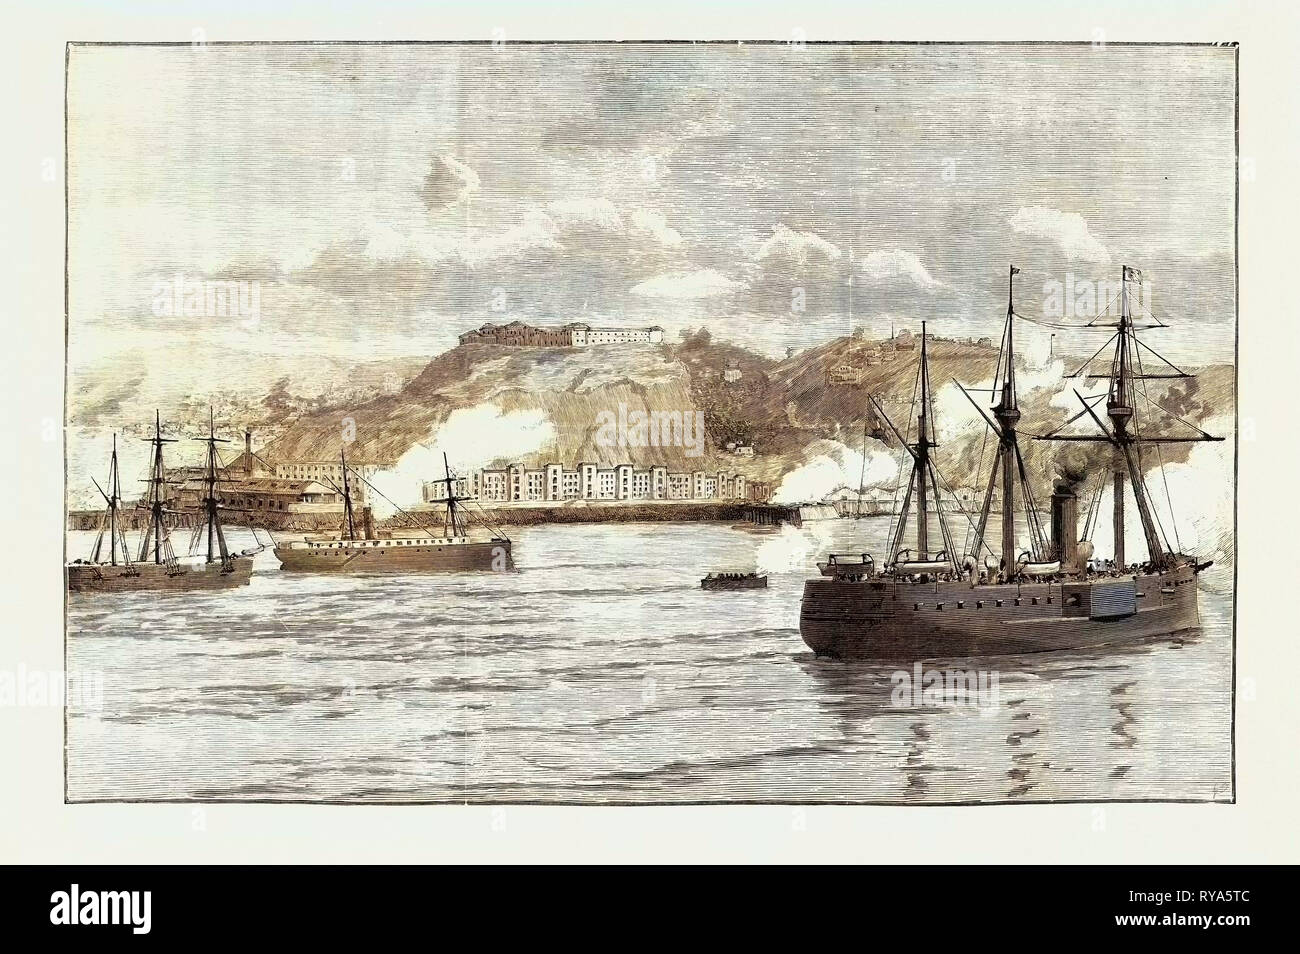 The Civil War in Chile Hostilities at Valparaiso: Exchange of Shots Between Shore Batteries and Chilian Ironclad Blanco Encalada 1891 Stock Photo